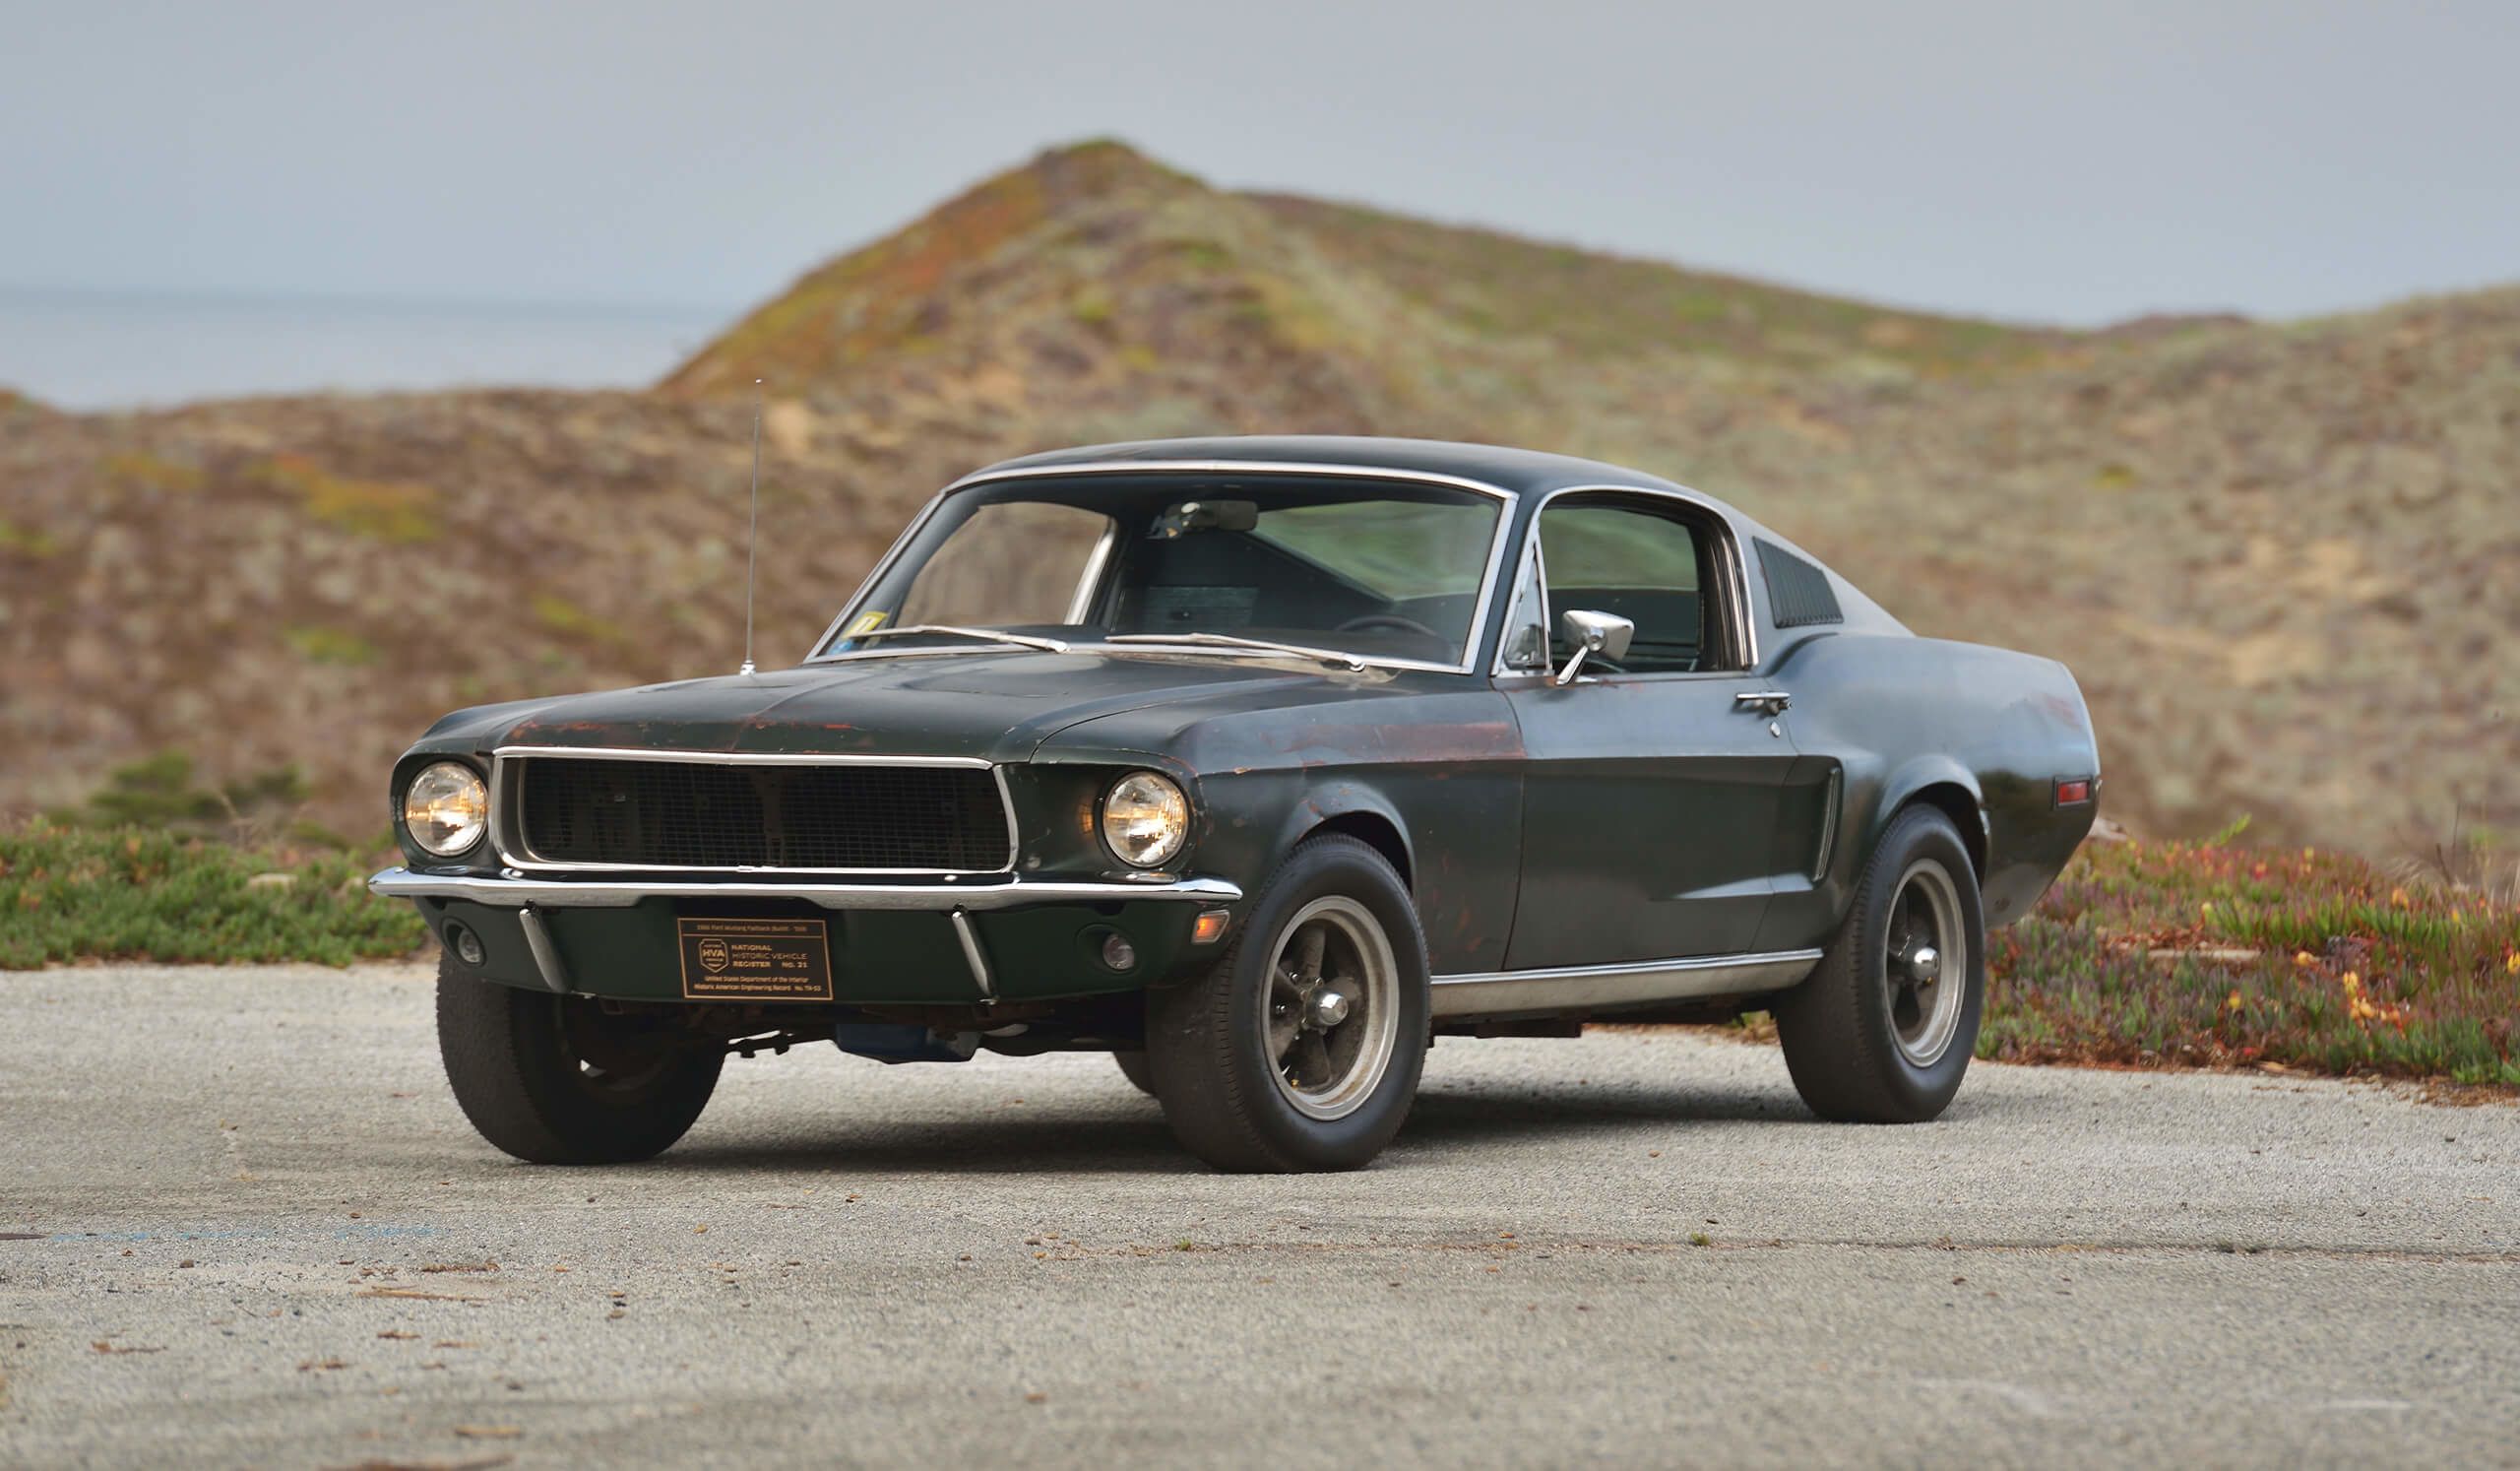 Ford Mustang driven in the movie Bullitt sells at auction for